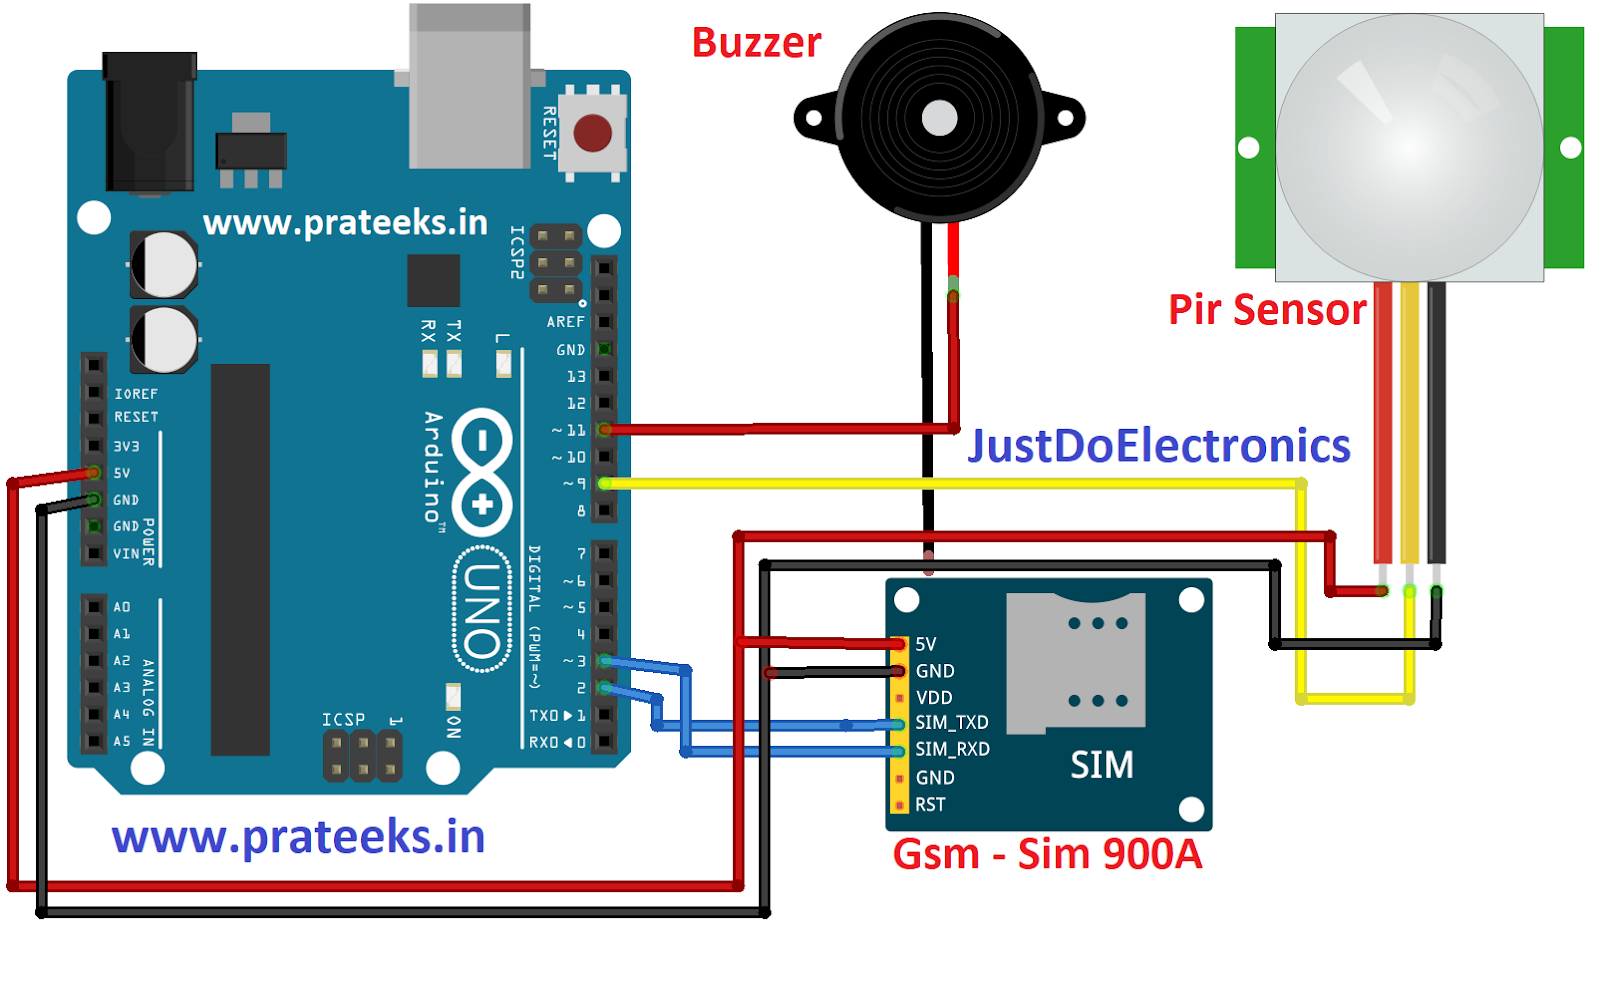 Stairs ledstrip with pir sensors keeps running, please help - Project  Guidance - Arduino Forum